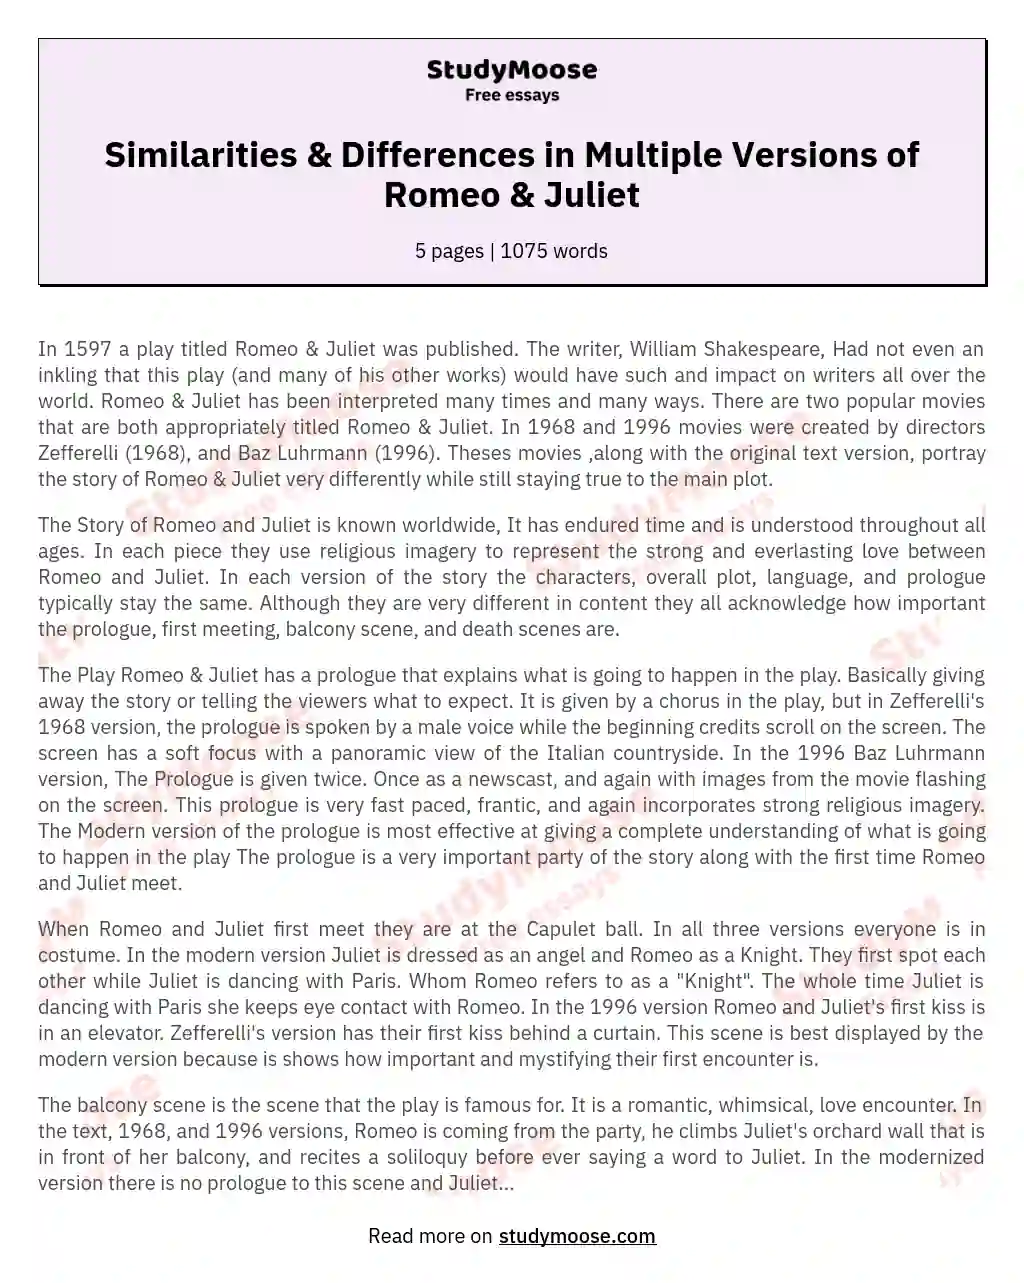 Similarities & Differences in Multiple Versions of Romeo & Juliet essay